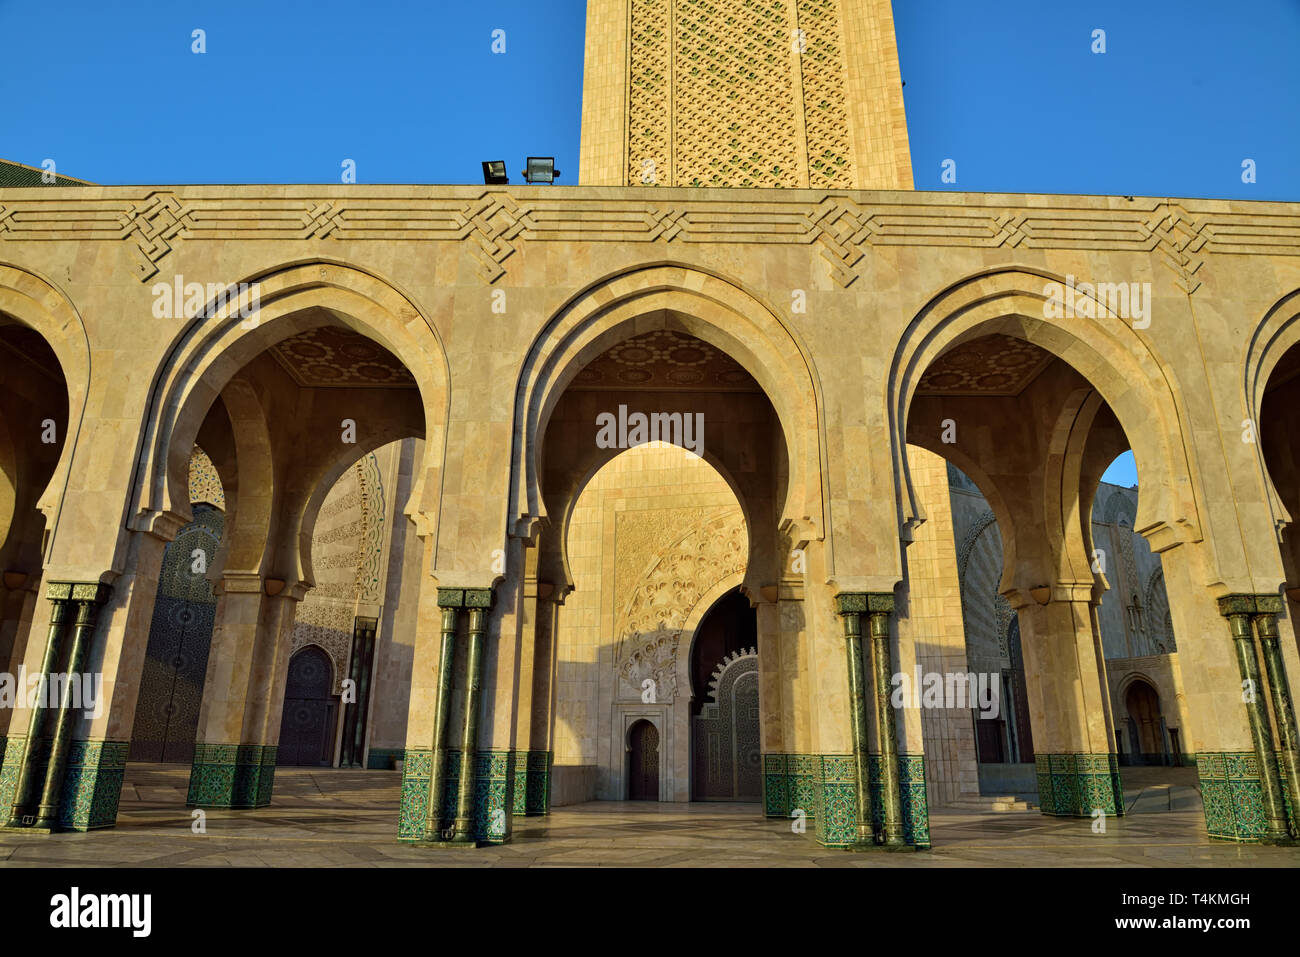 The style of the Hassan II Mosque displays strong Moorish influences, bringing to mind the Alhambra and Mezquita in Spain. Horseshoe arches prevail bo Stock Photo